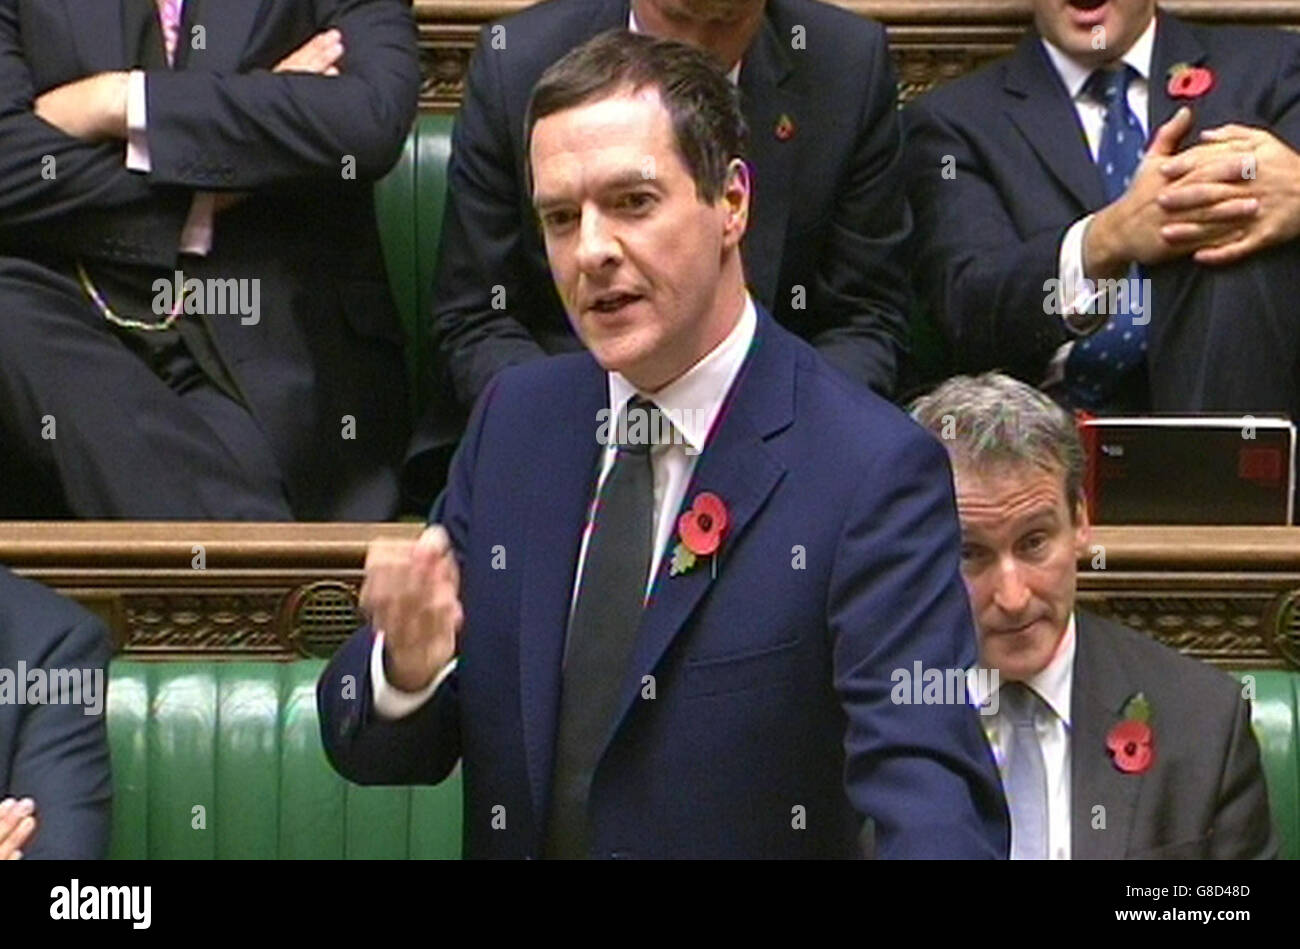 Chancellor of the Exchequer George Osborne speaking in the Main Chamber, House of Commons, London during Treasury Questions after the House of Lords blocked Government plans to cut tax credits last night. Stock Photo